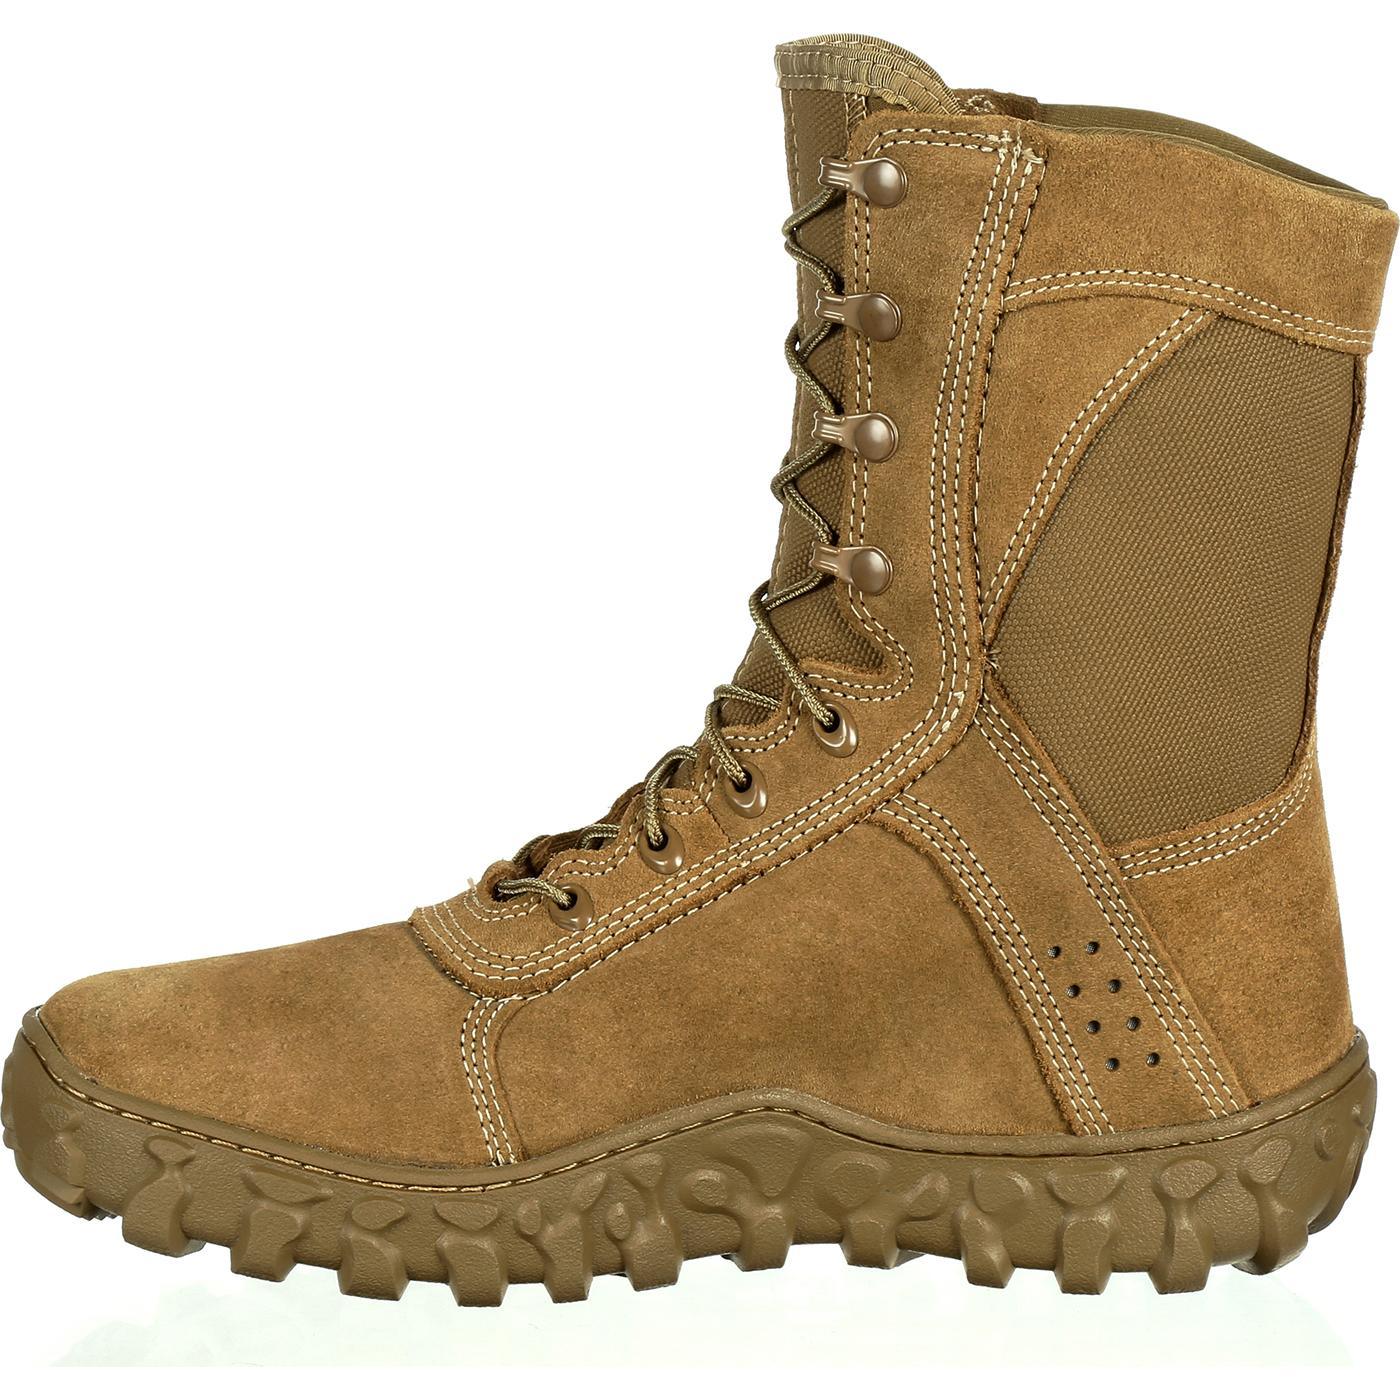 Rocky S2V Tactical Military Boot - Flyclothing LLC